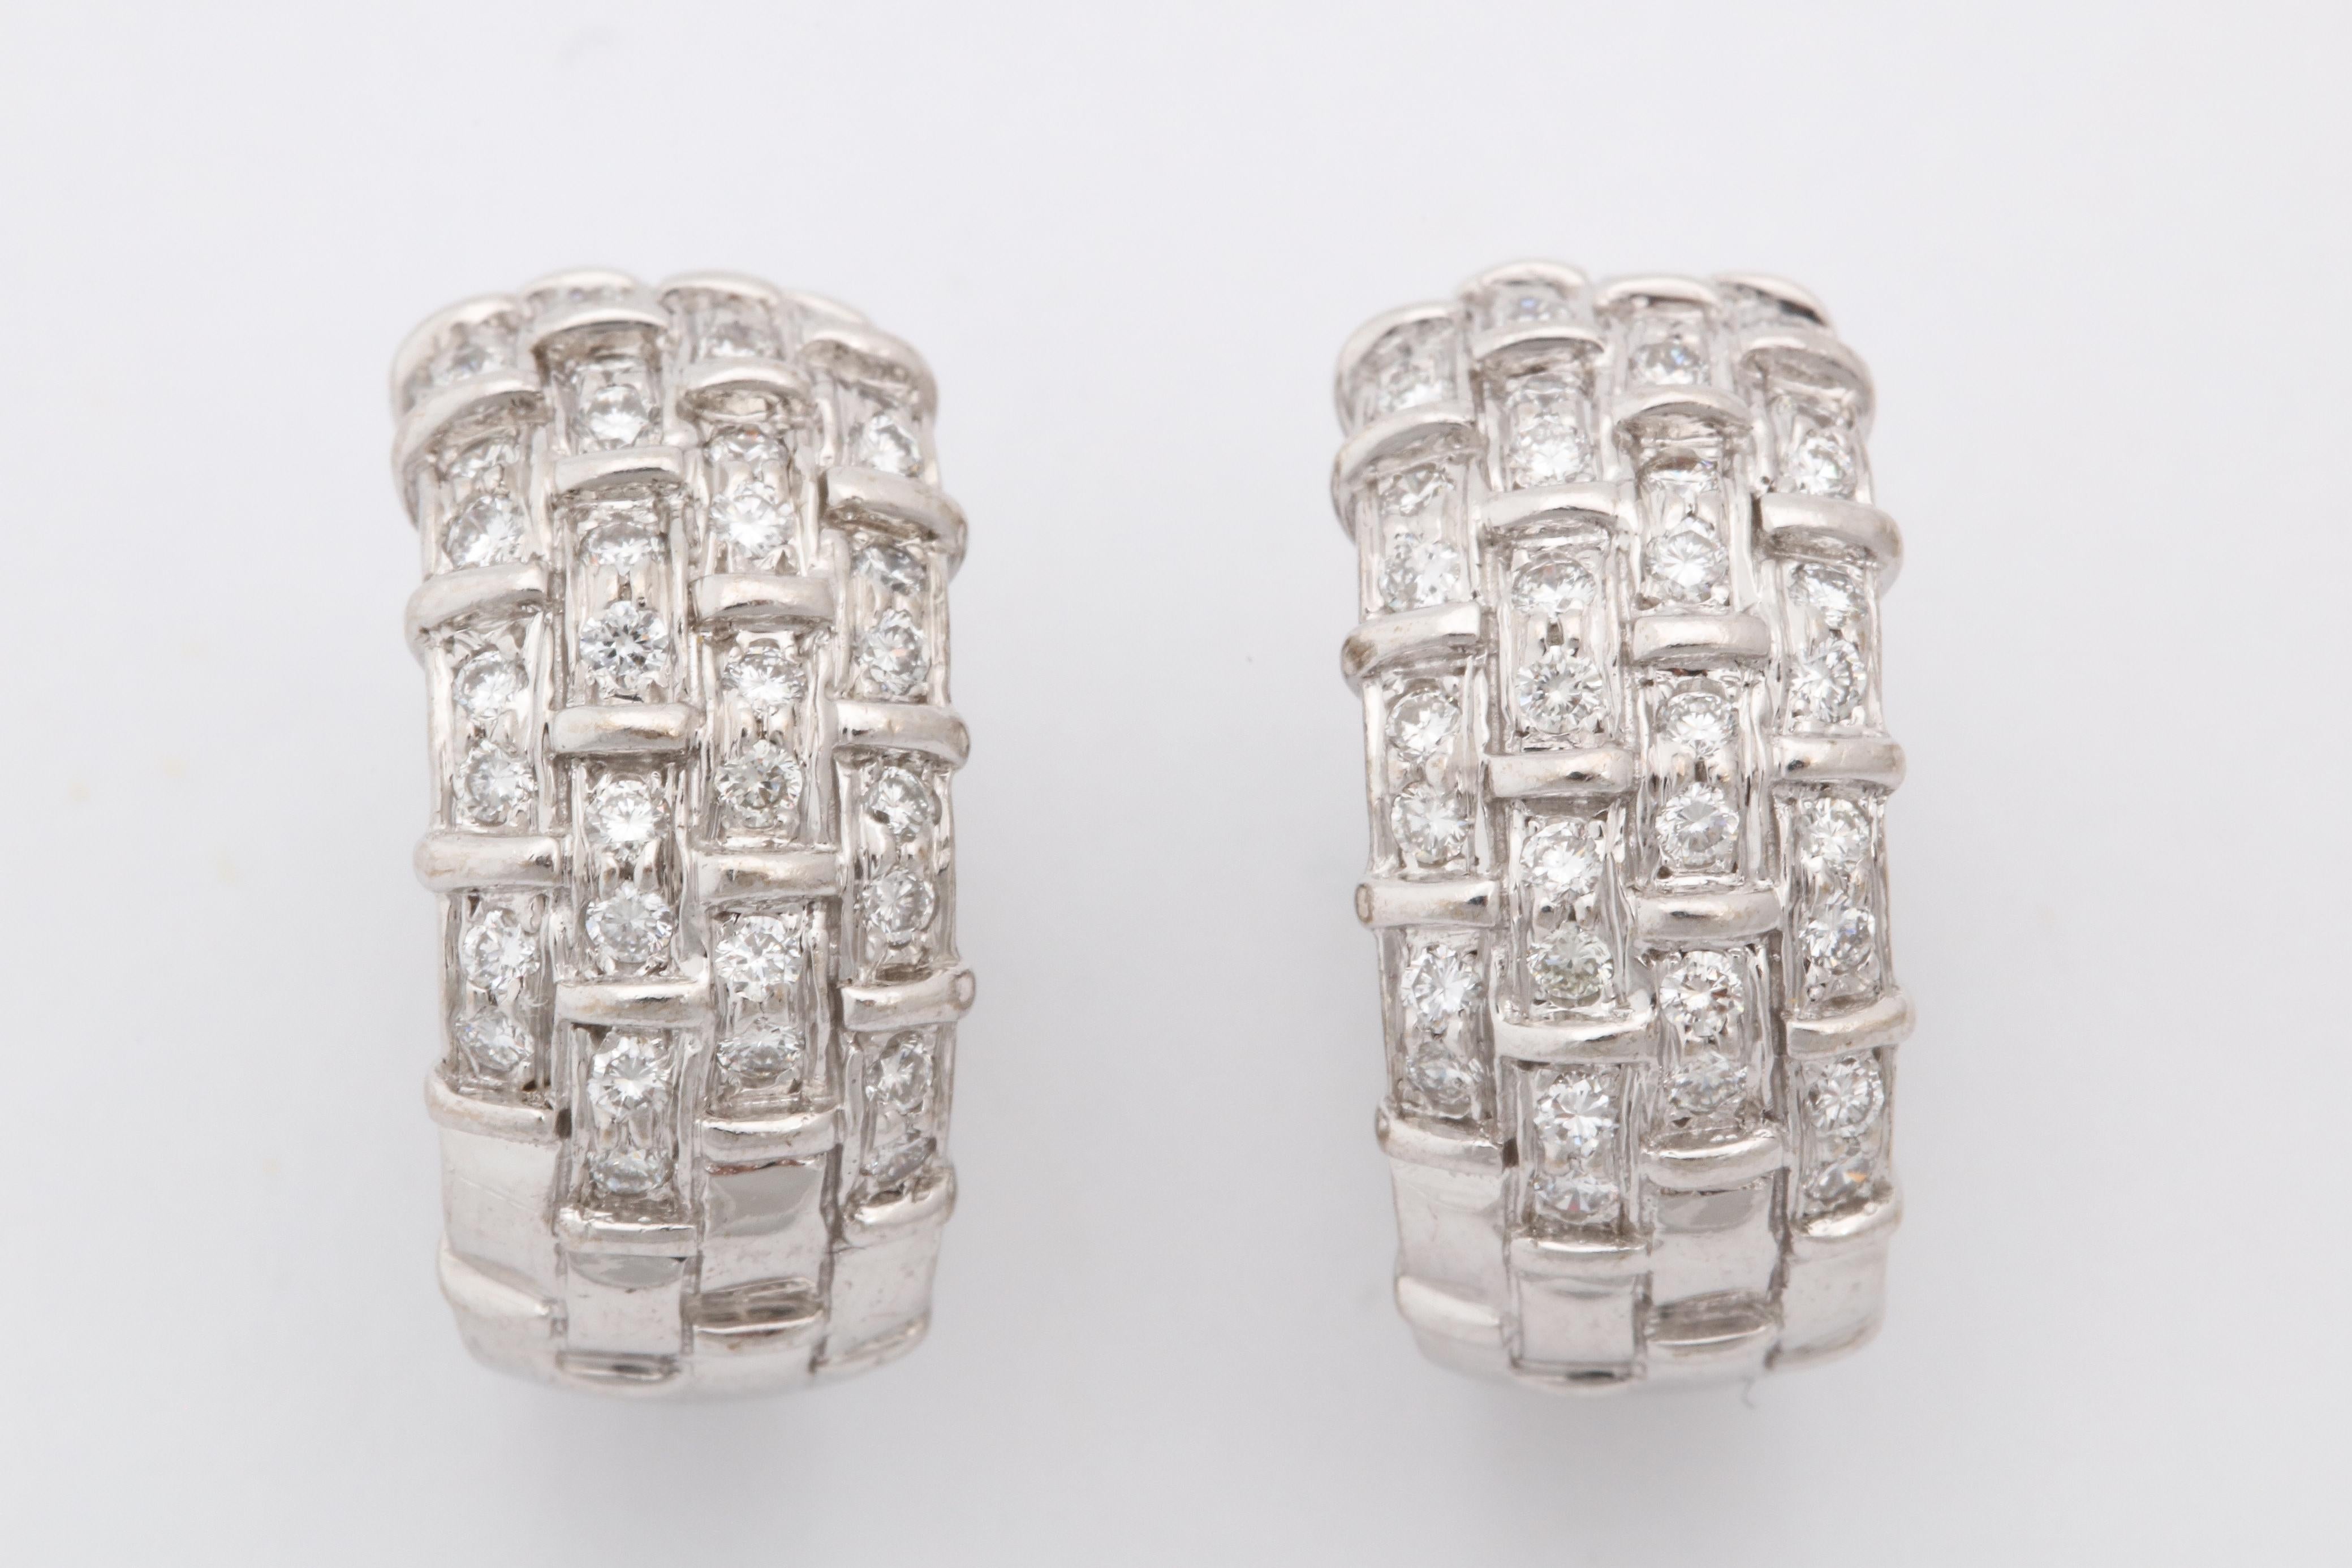 One Pair Of High Quality 18kt White Gold Half Hoop Earrings Created By Boucheron Paris. Each Earring Is Designed With Numerous High Quality Full Cut Diamonds Weighing Approximately [2] Carats Total Weight. Made In The 1980's In France. NOTE: Posts